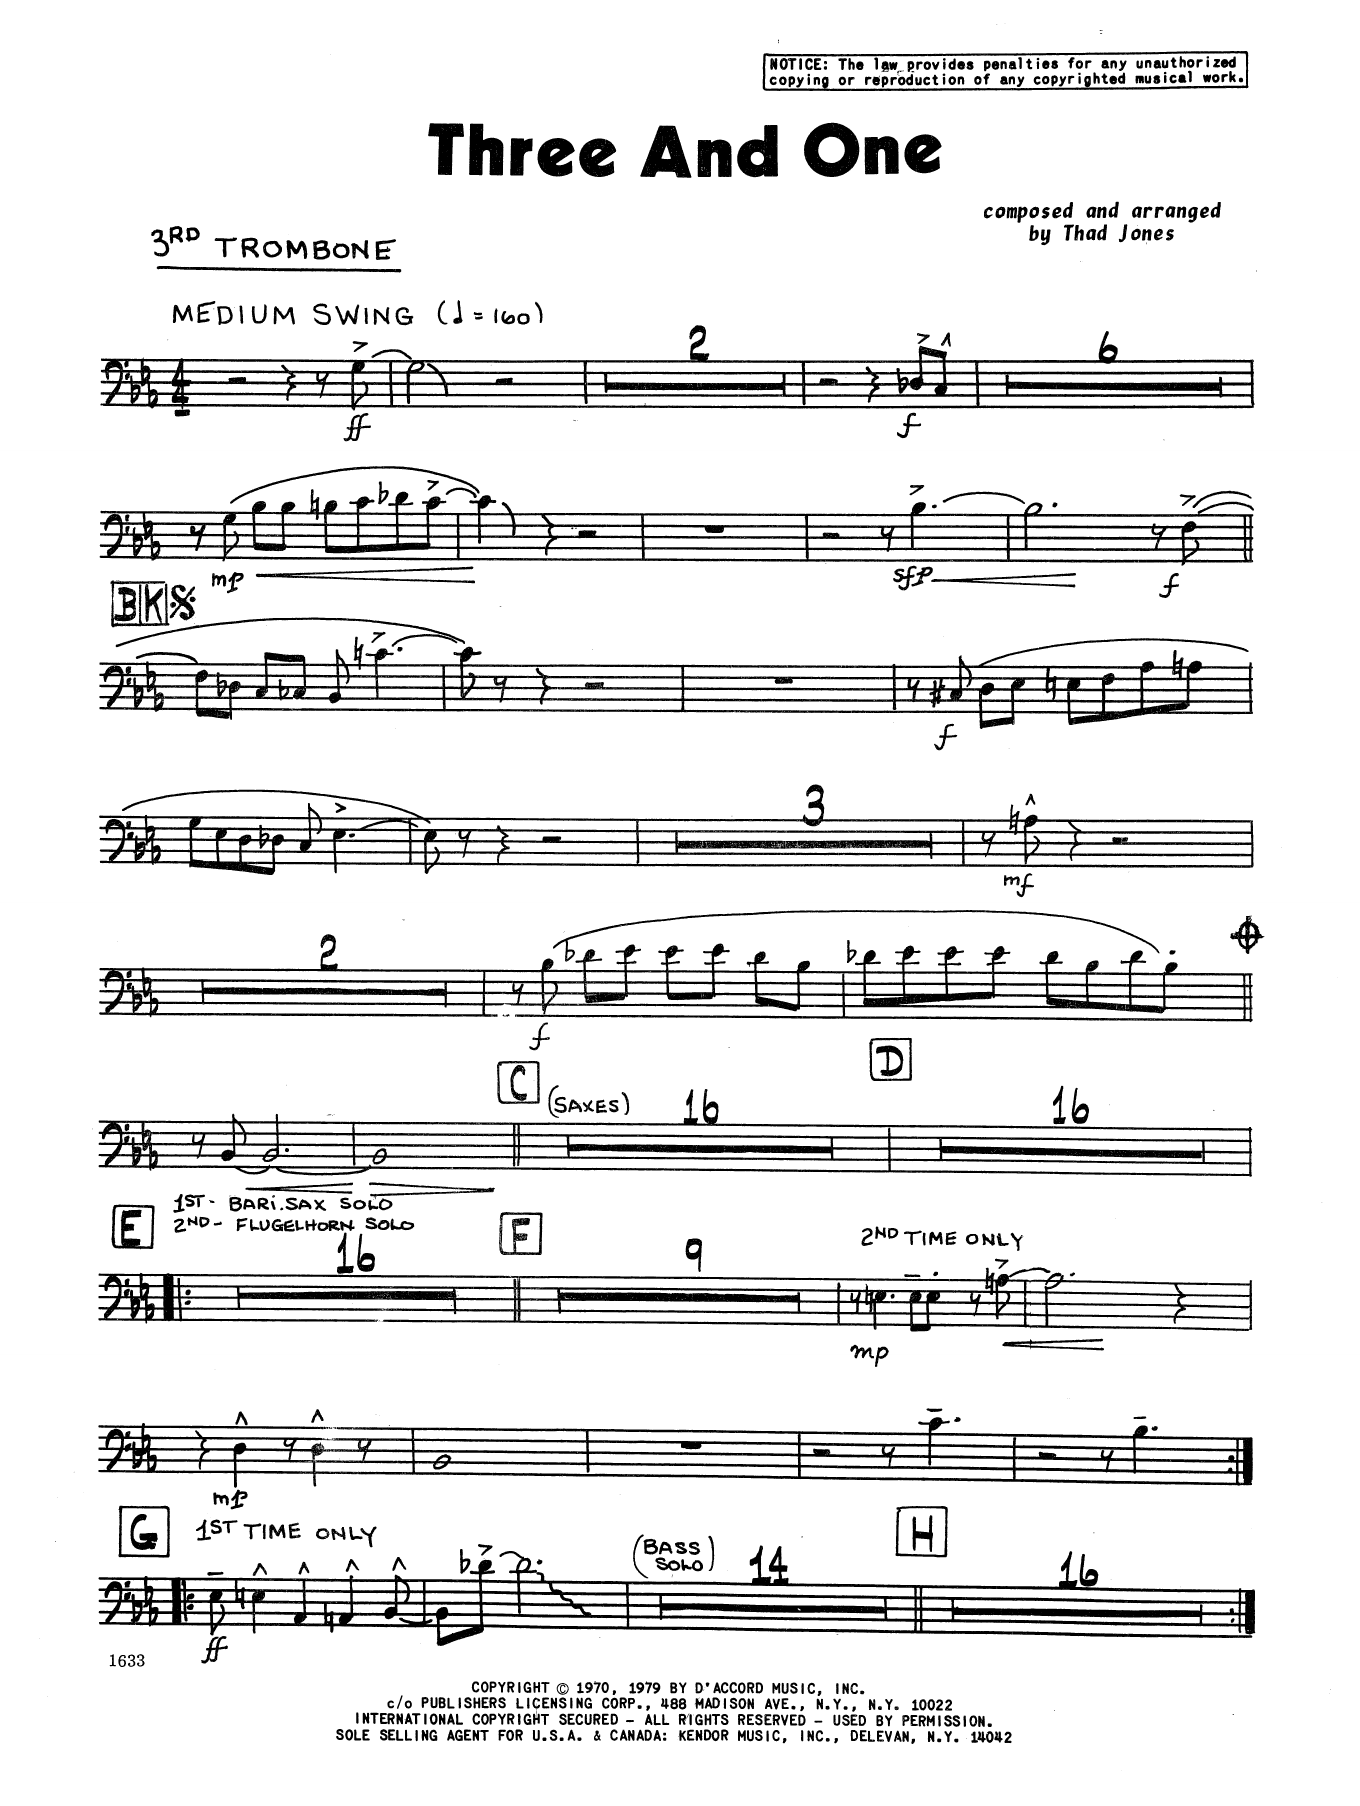 Thad Jones Three And One - 3rd Trombone sheet music preview music notes and score for Jazz Ensemble including 2 page(s)